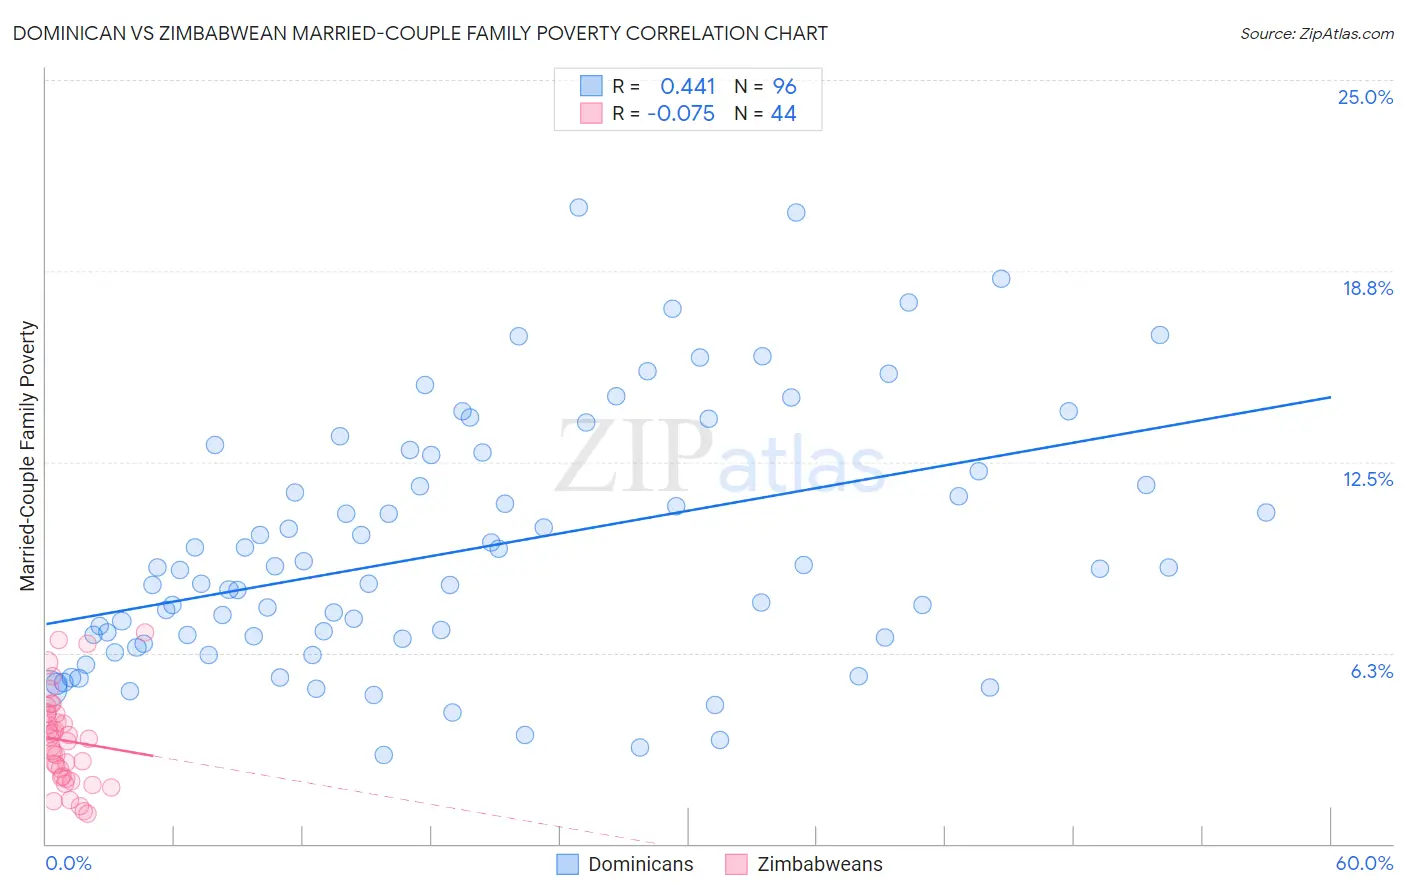 Dominican vs Zimbabwean Married-Couple Family Poverty